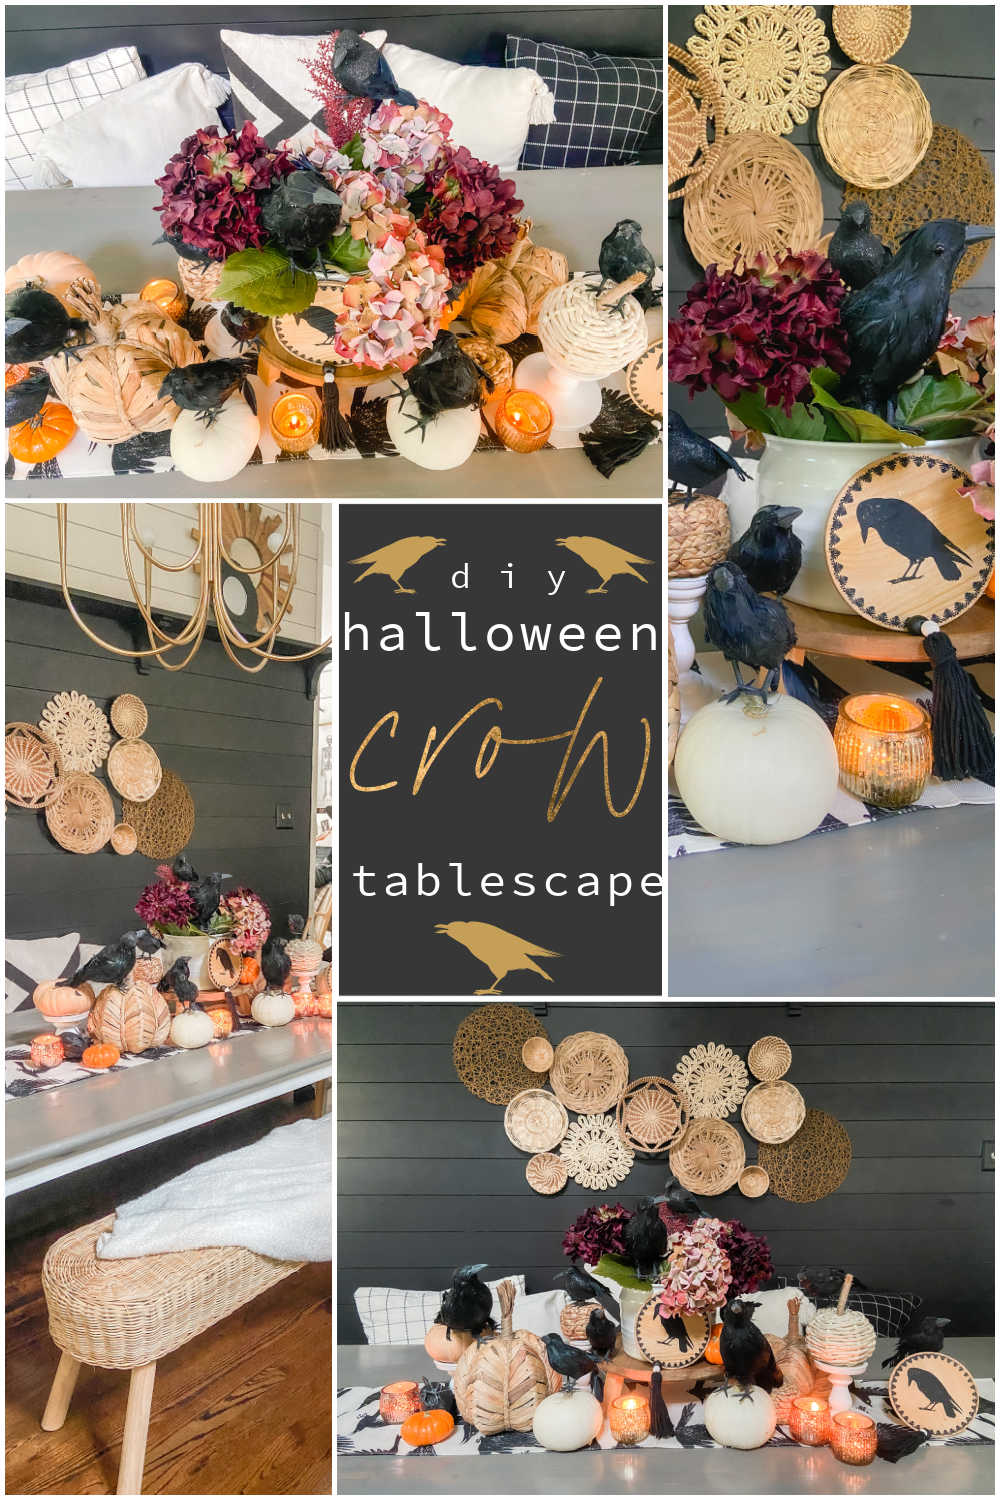 Easy Halloween Crow Tablescape. Create a spooky "crow" themed table for Halloween in just three easy steps!